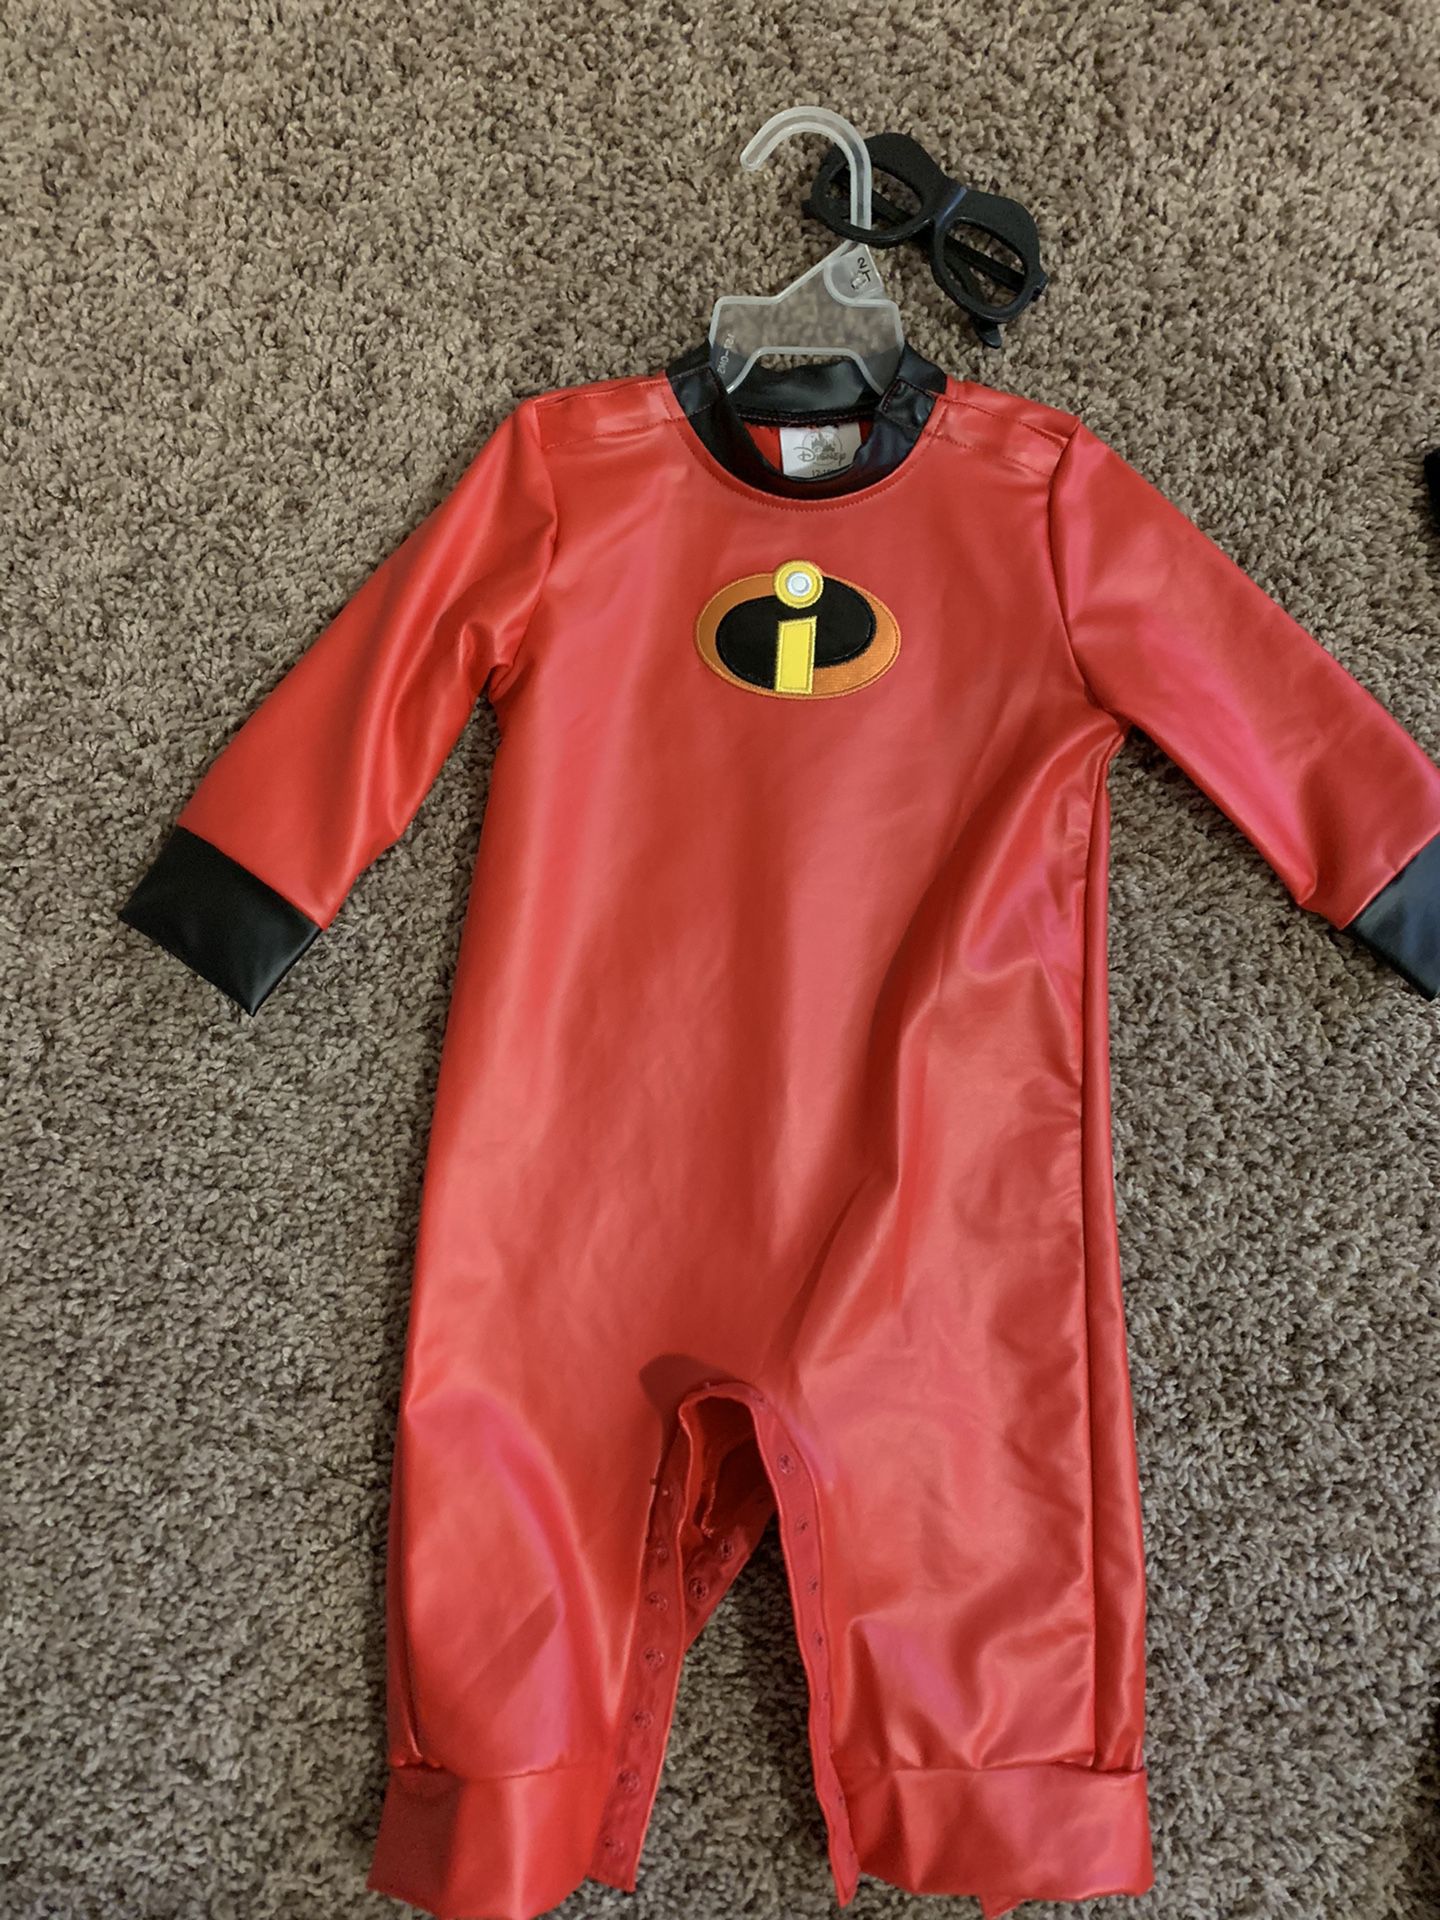 Baby Jack Jack from Incredibles Halloween Costume